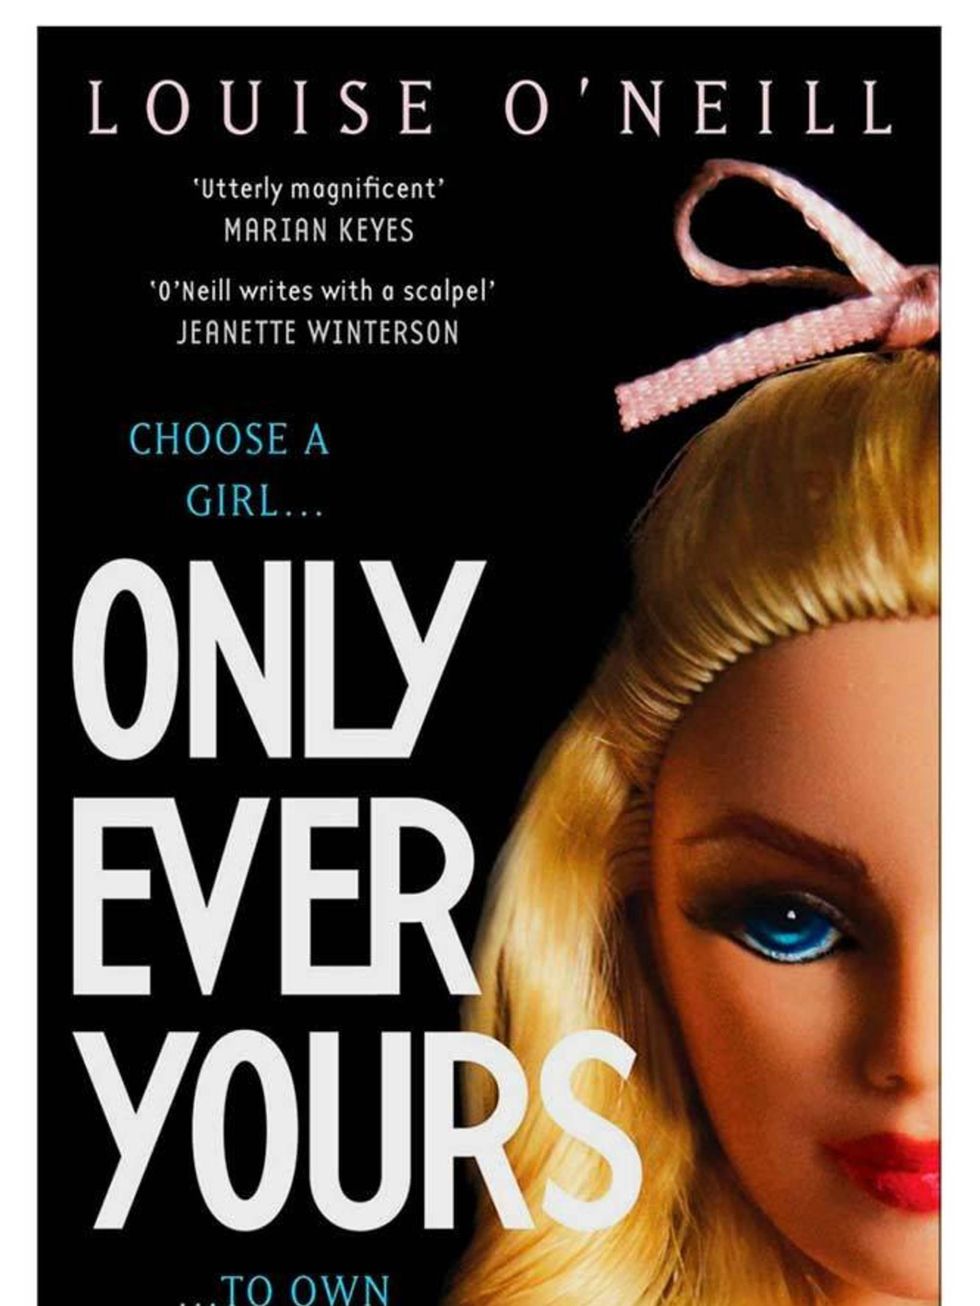 <p>Only Ever Yours by Louise O&rsquo;Neill</p>

<p>This debut won the inaugural YA Book Prize this year and for good reason. A brutal, brilliant novel, it reads much like a teen The Handmaid&rsquo;s Tale in its dystopian setting of a school when girls are